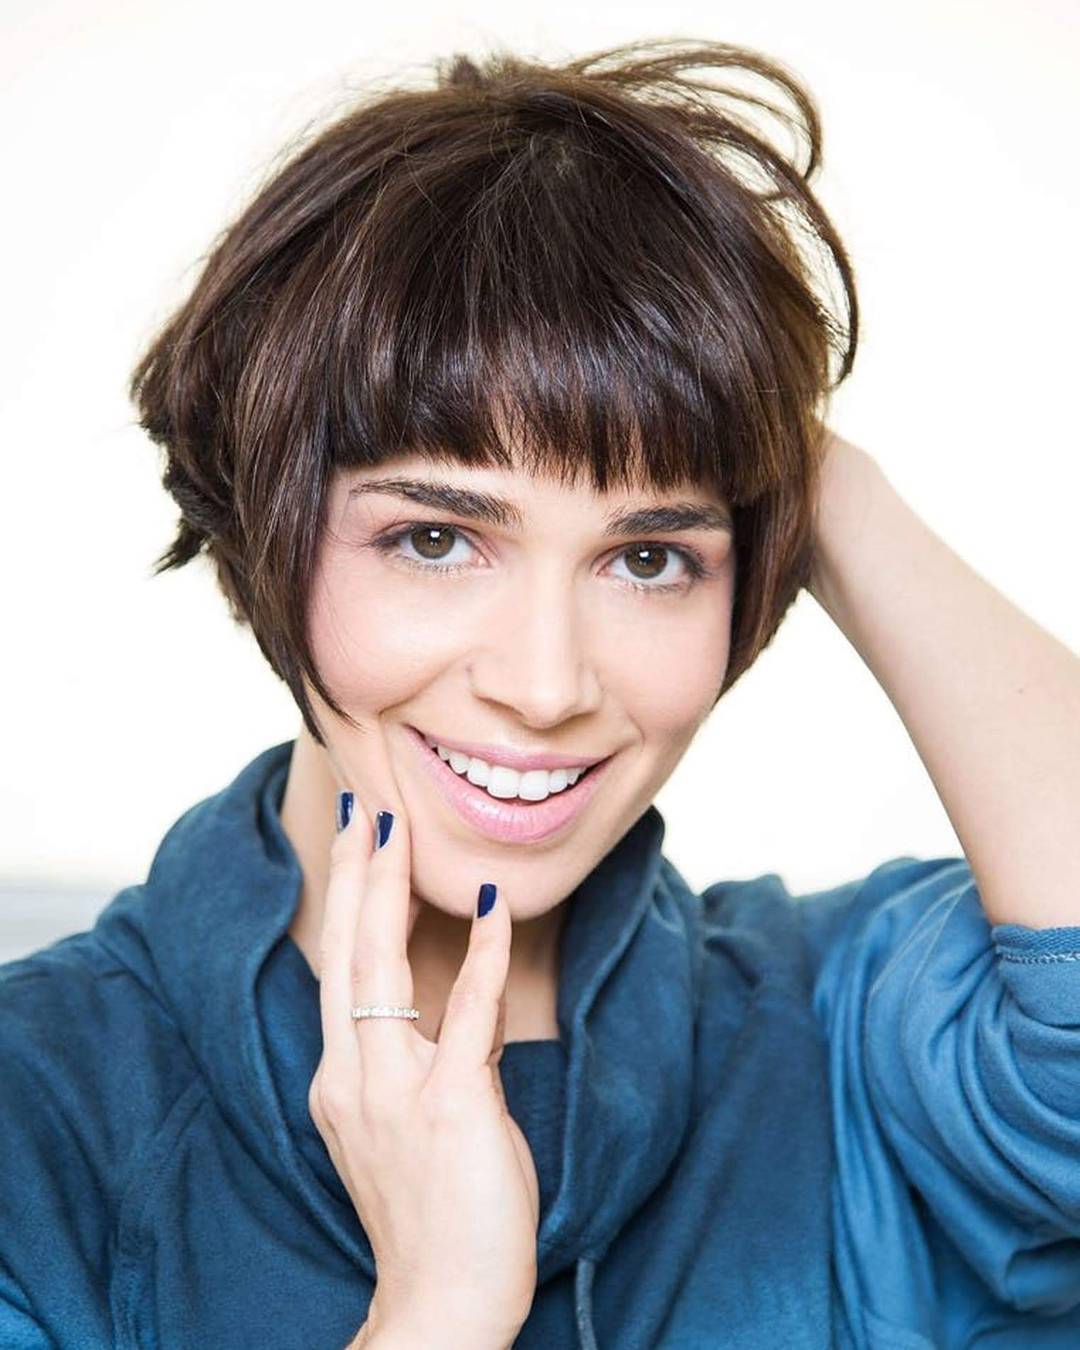 Stylish Pixie Haircut for Women, Short Hairstyles Designs